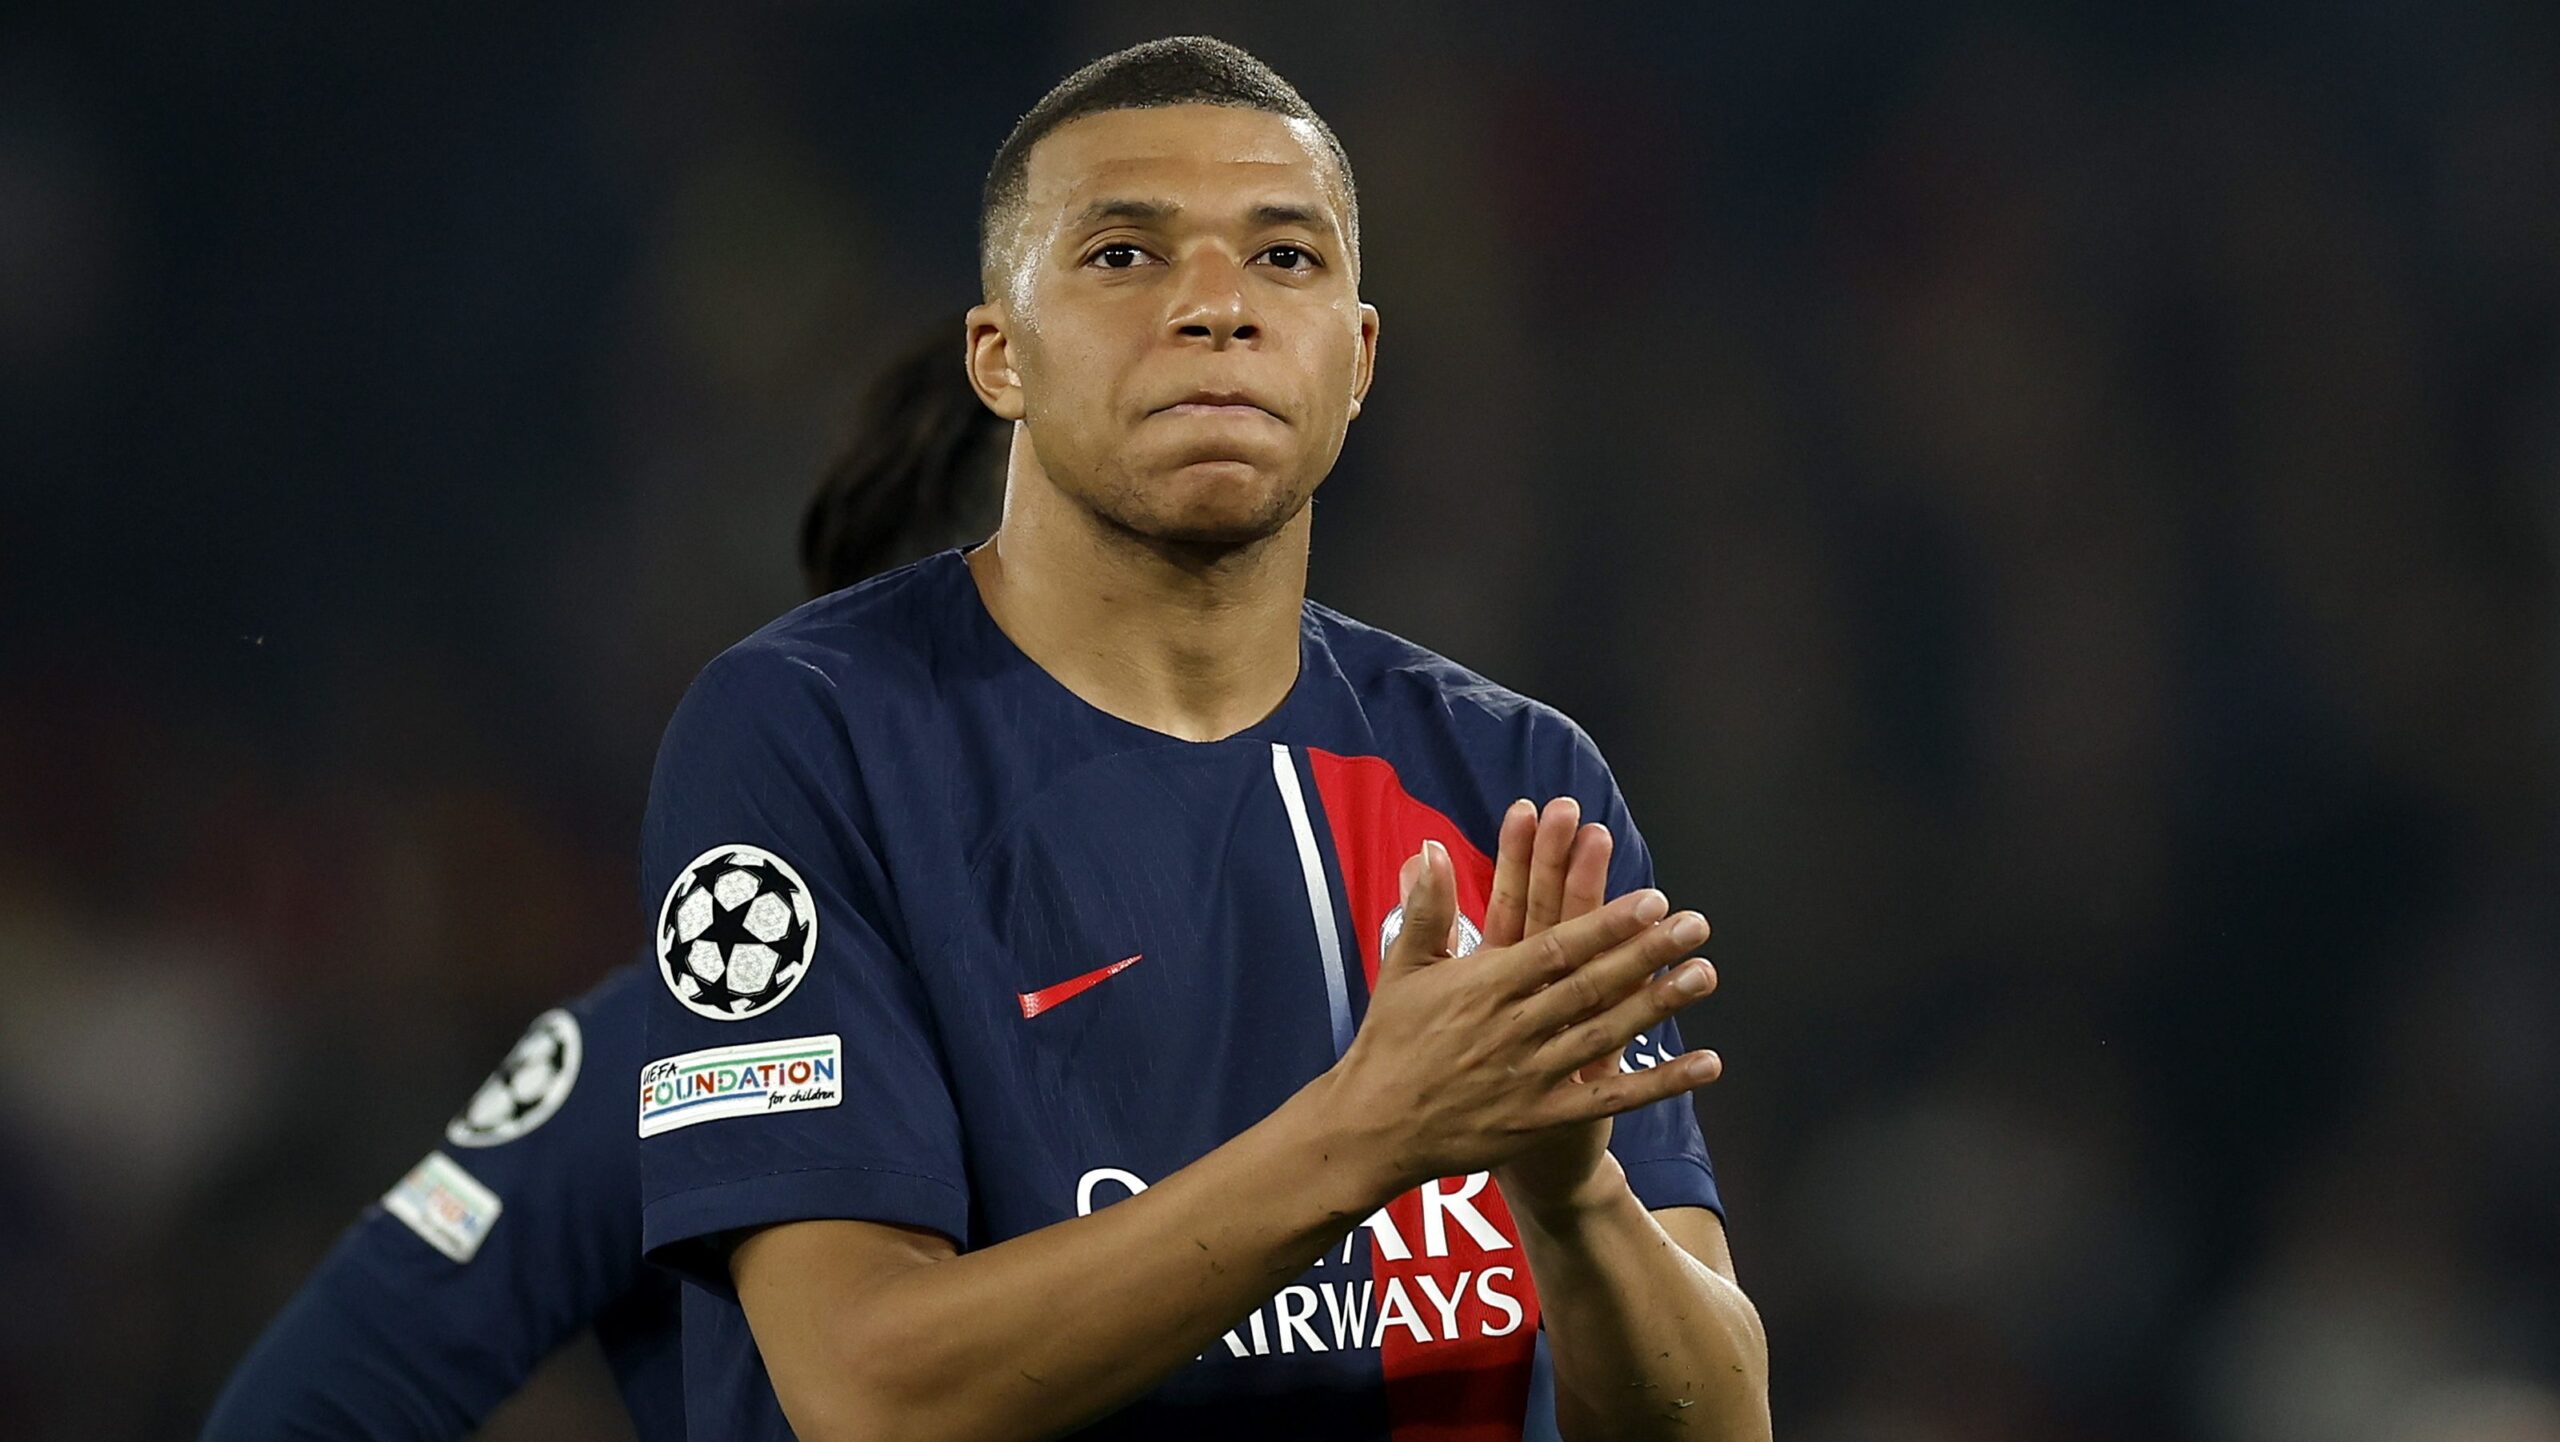 mbappe's-viral-reaction-when-asked-if-he-will-support-real-madrid-against-bayern-[video]